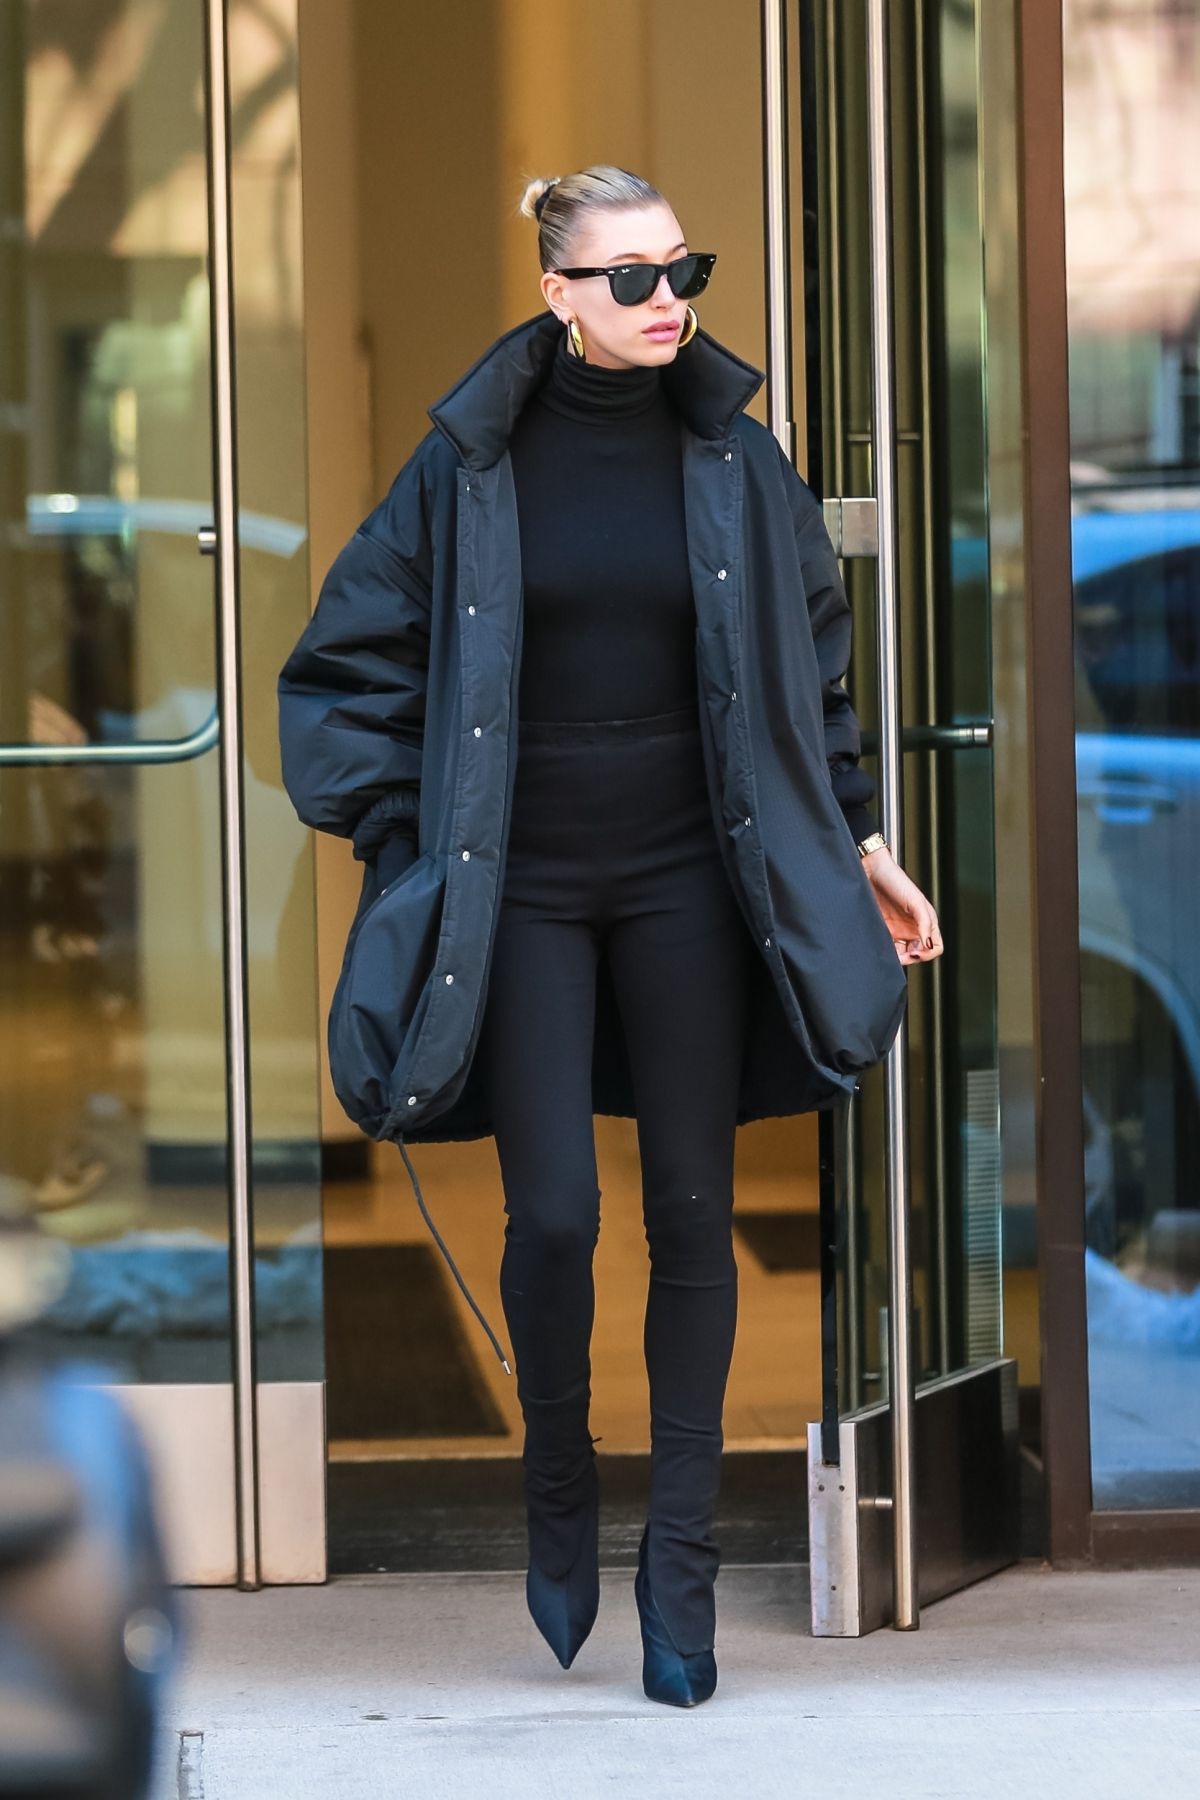 hailey-bieber-out-in-new-york-03-09-2019-0.jpg